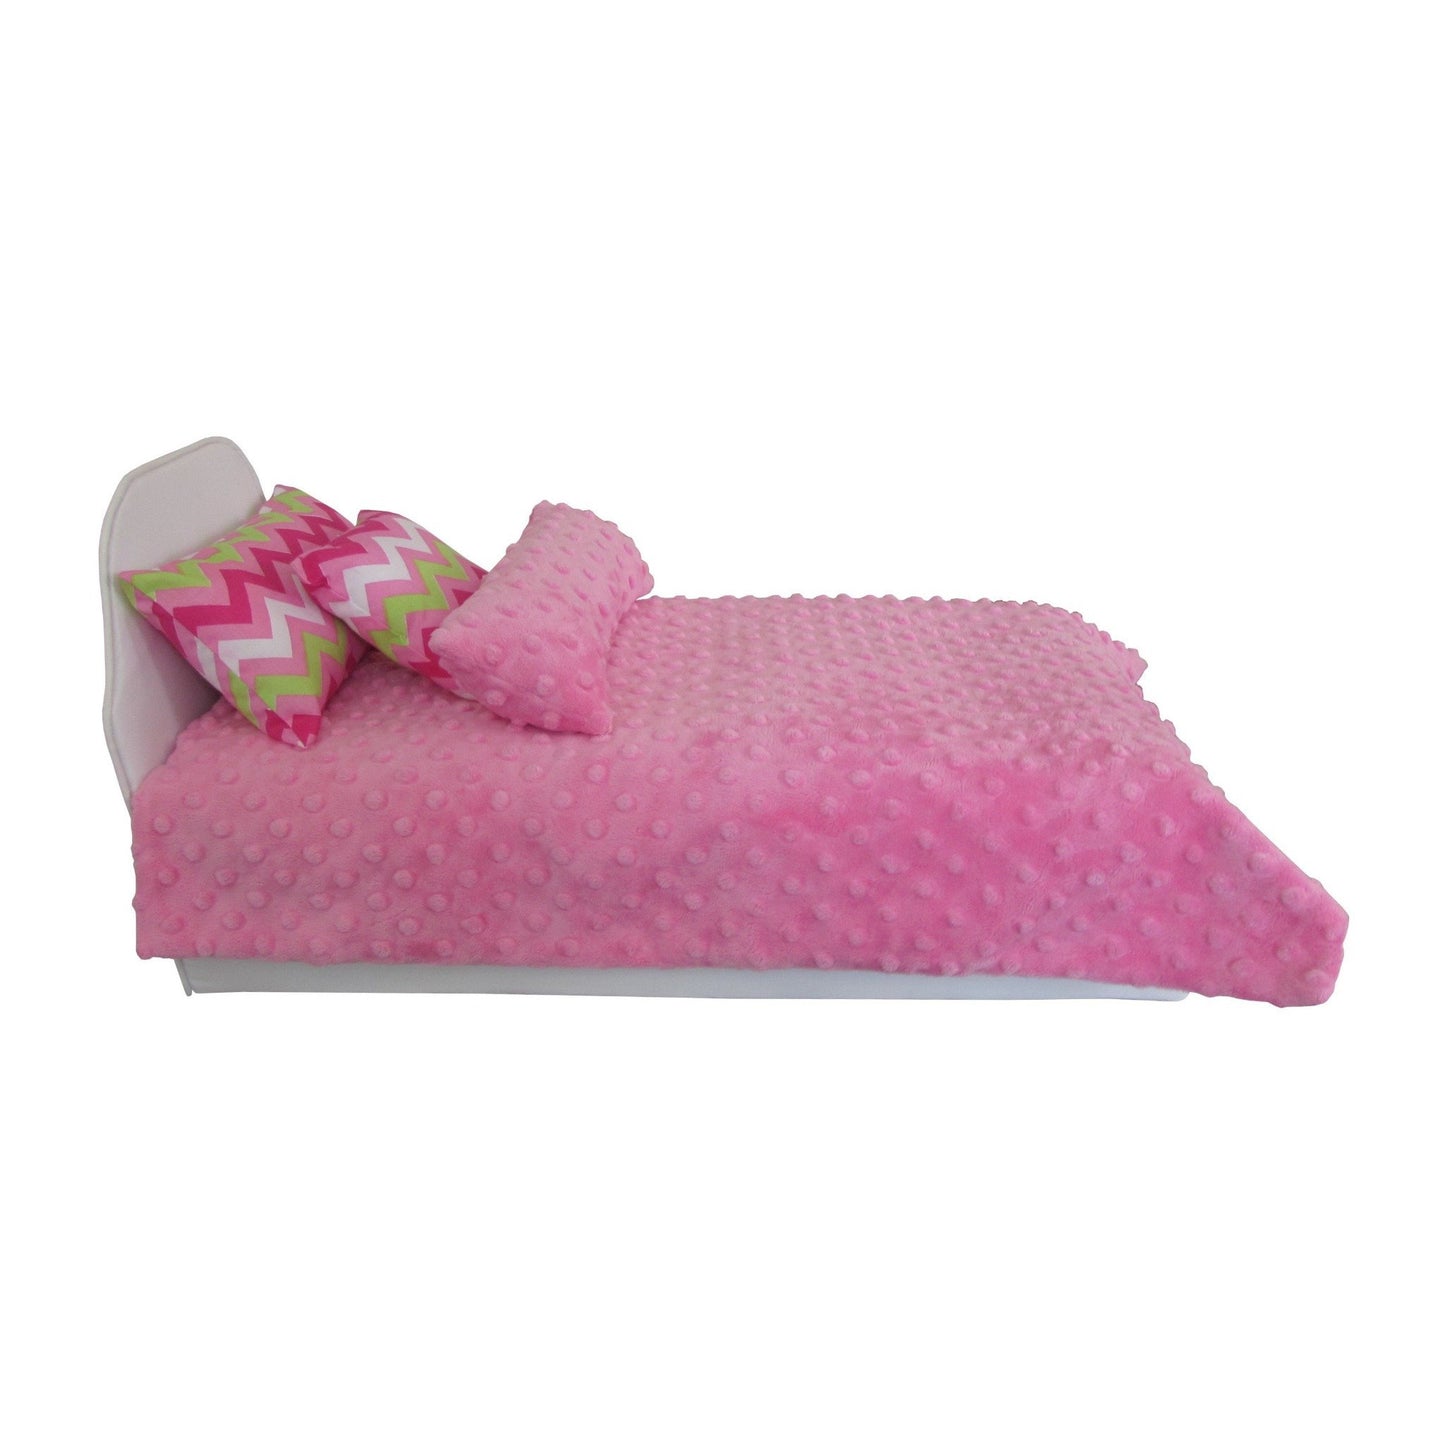 Pink Multi-color Chevron Pillow and Minky Comforter for 18-inch dolls